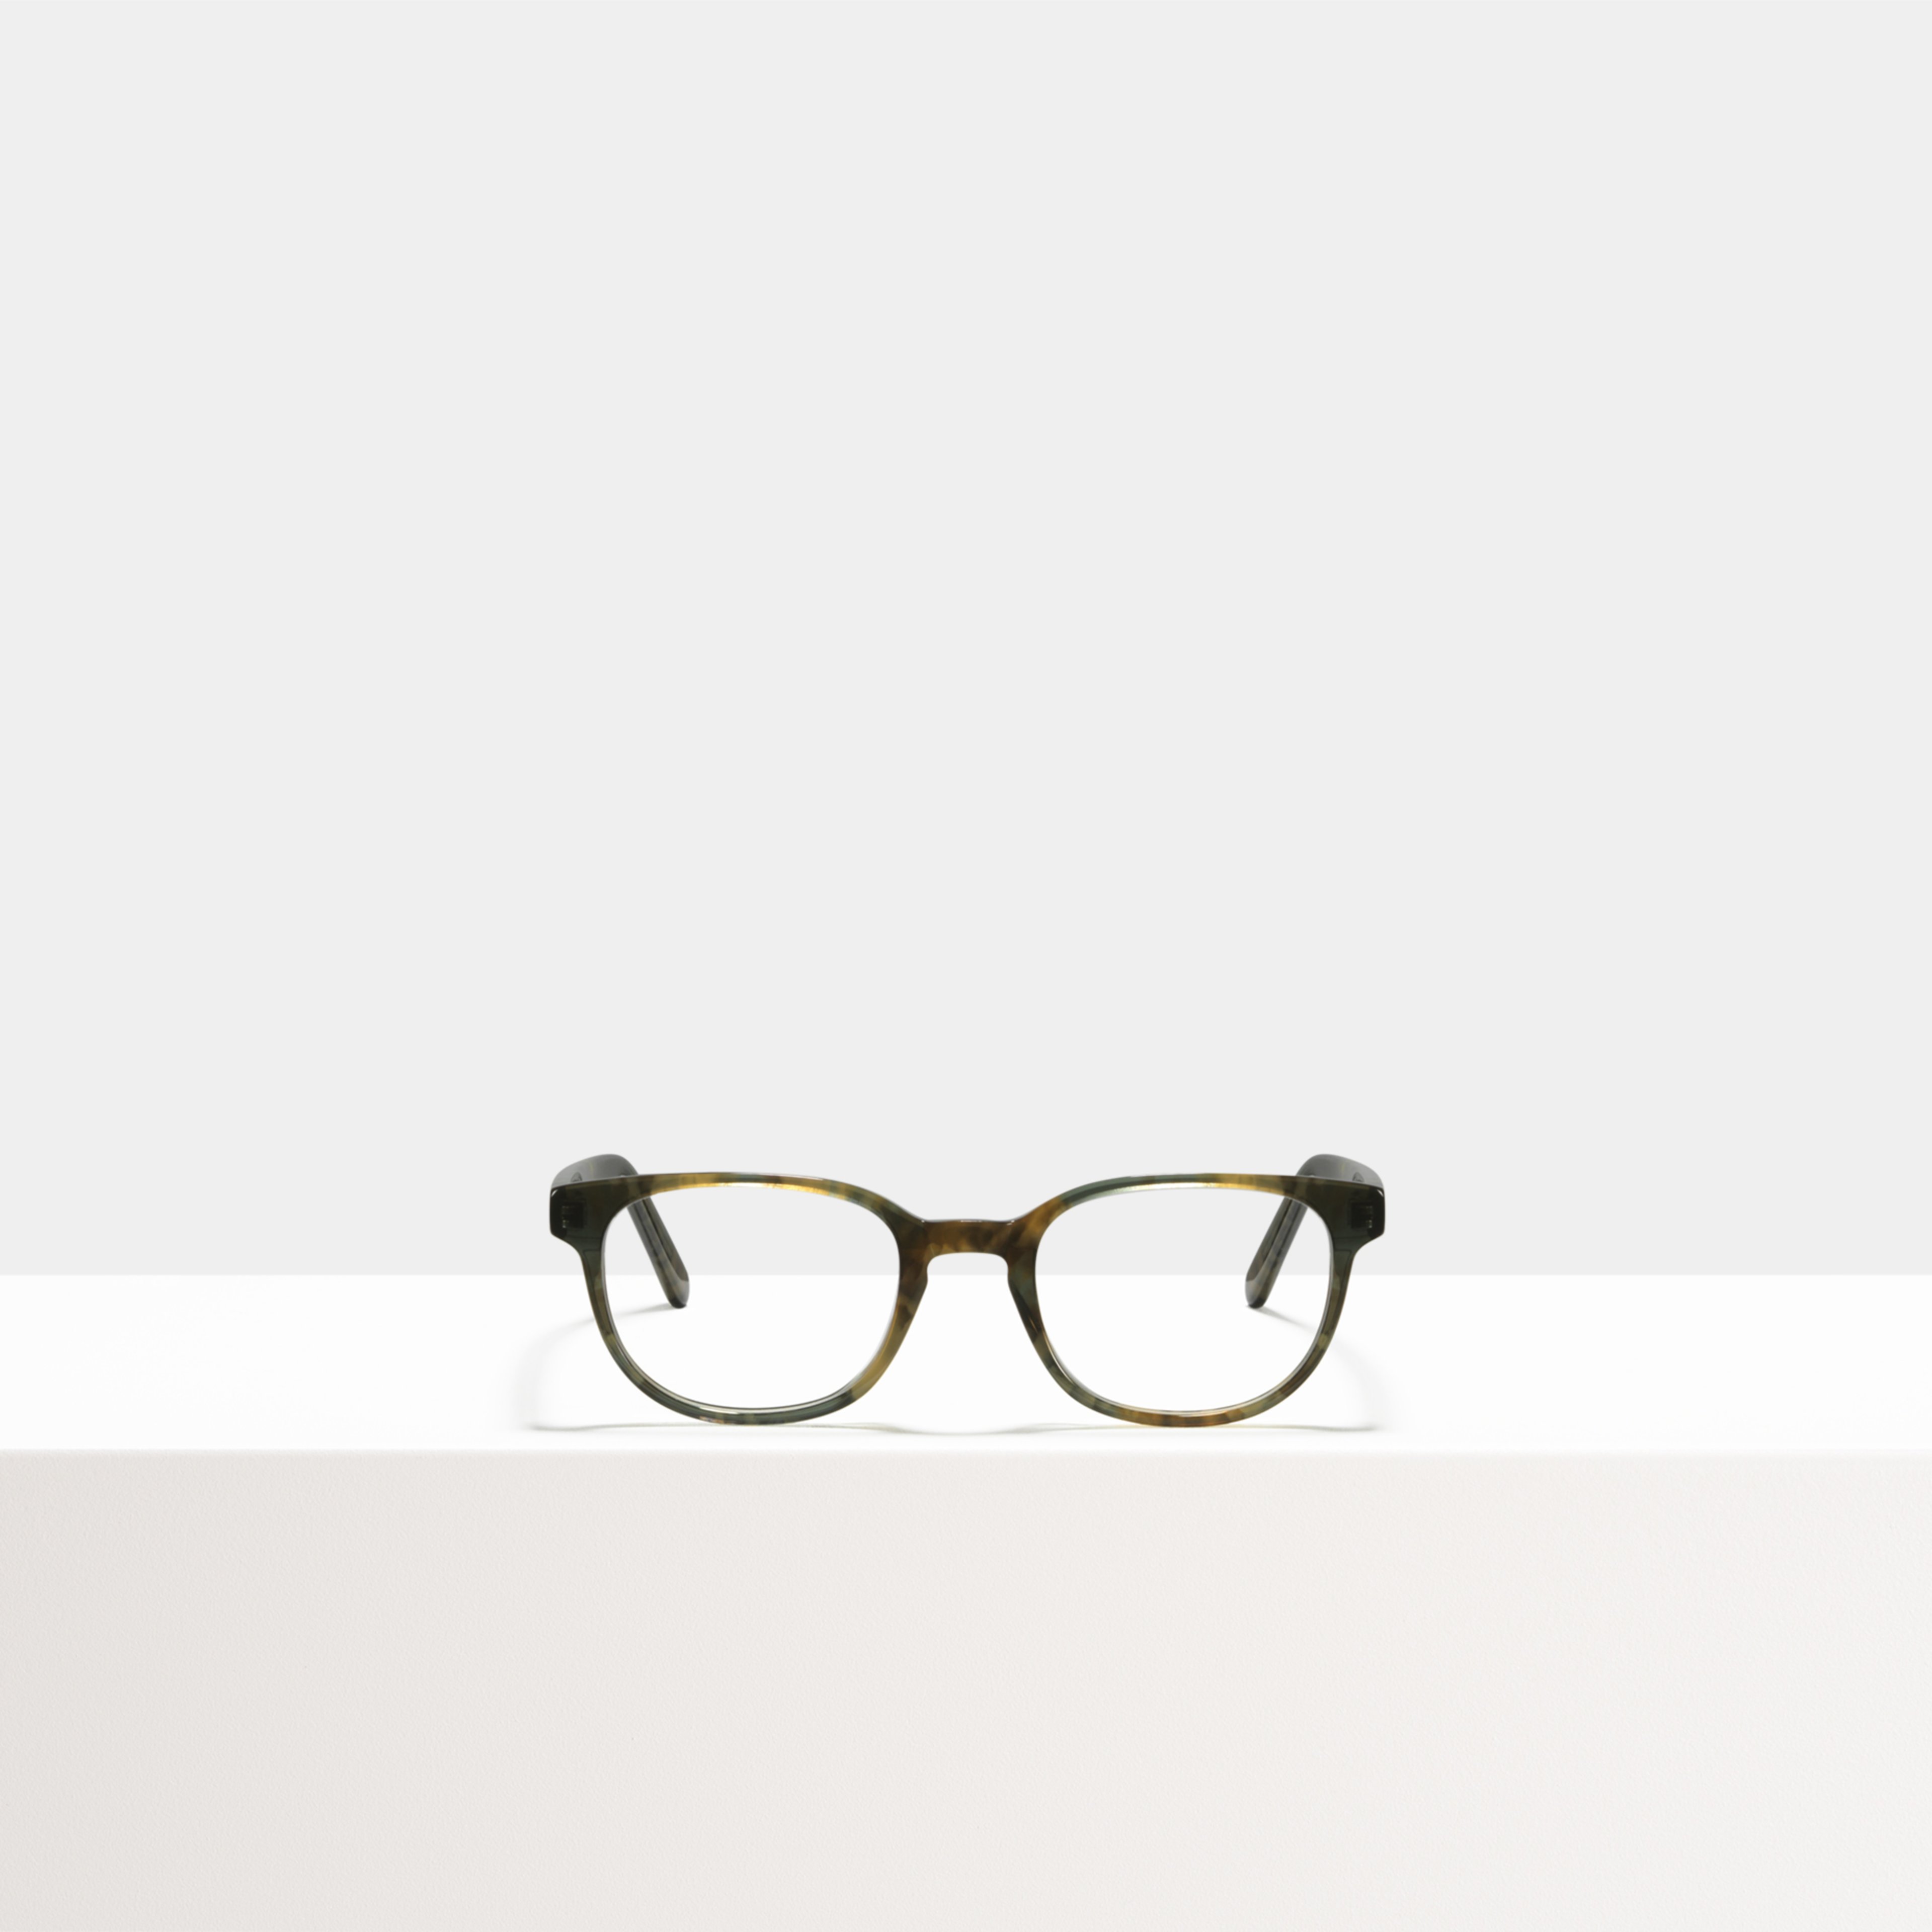 Ace & Tate Glasses | oval Acetate in Green